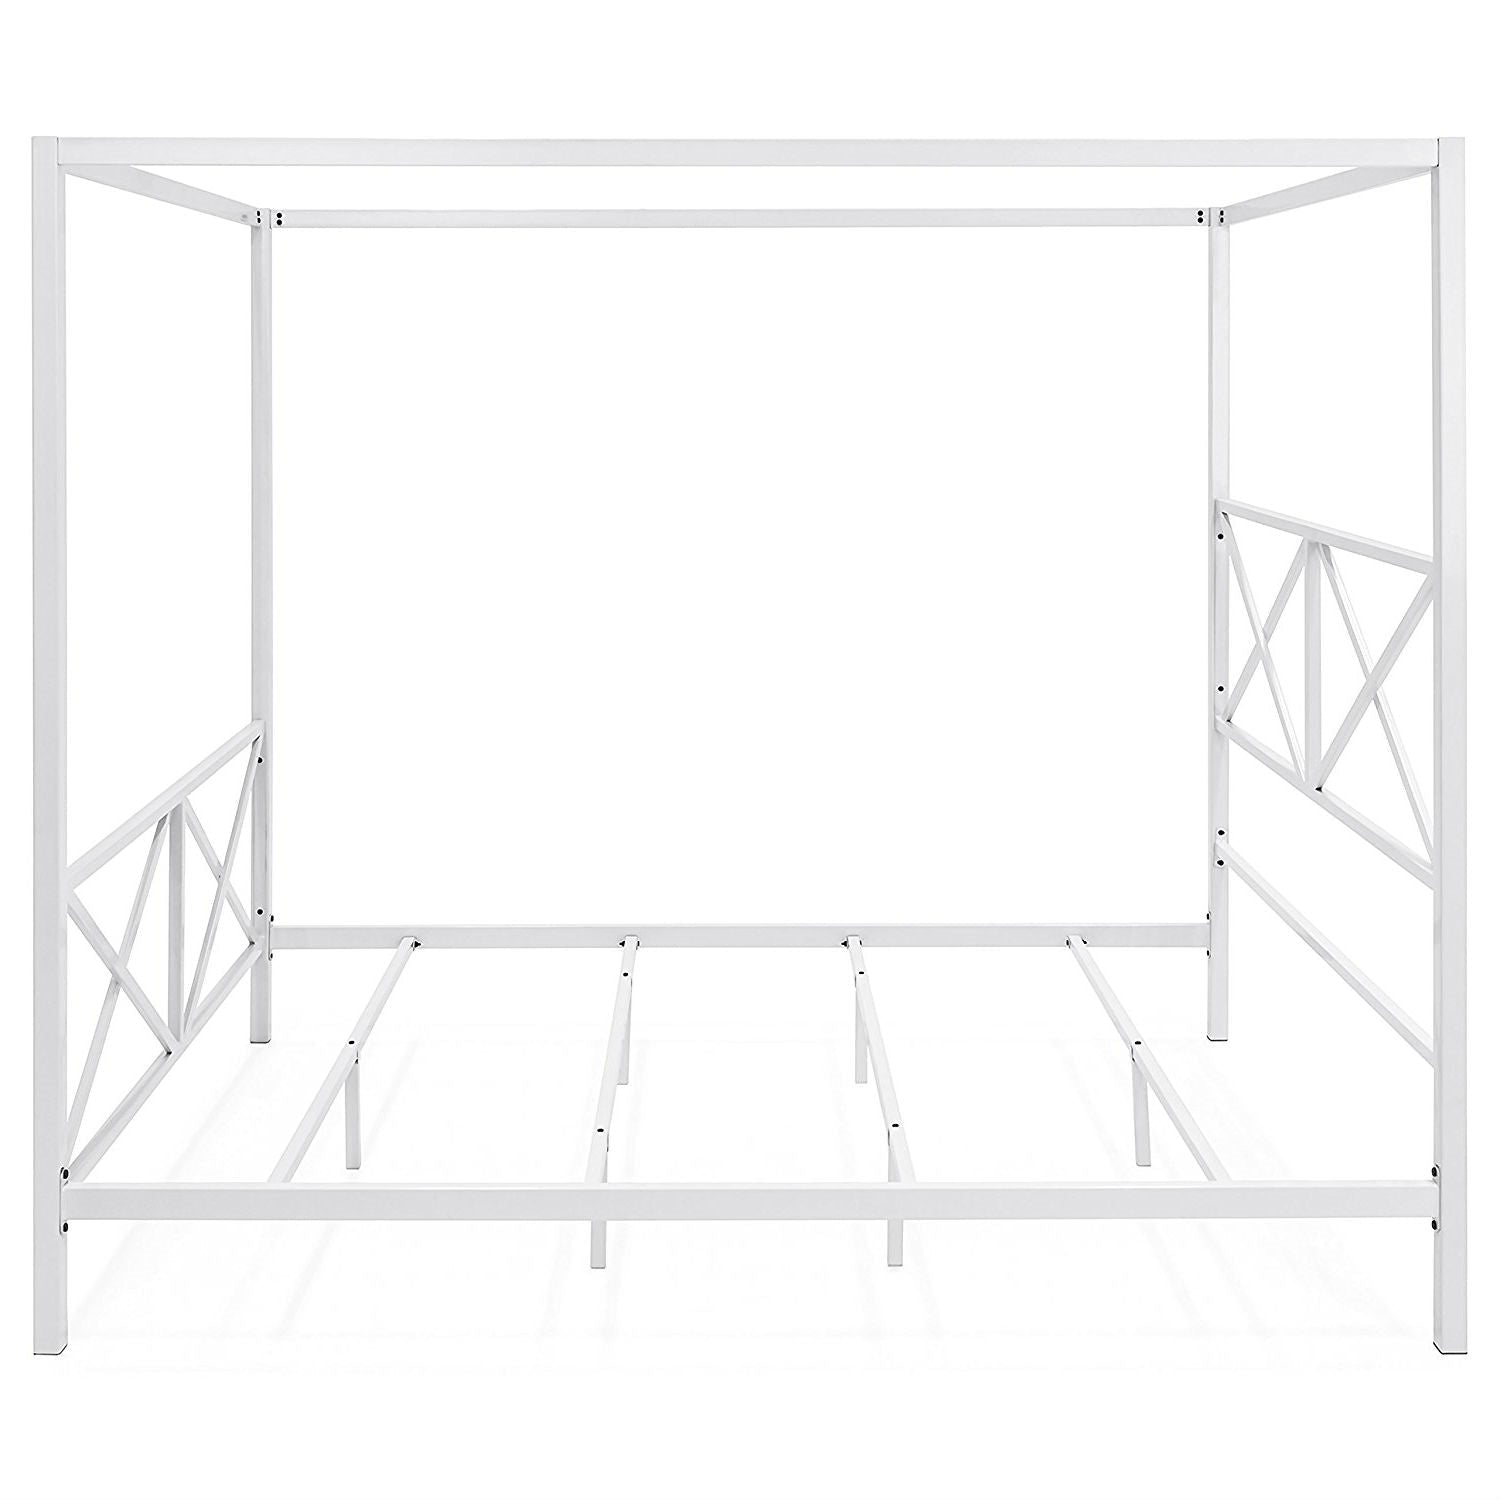 Bedroom > Bed Frames > Canopy Beds - Queen Size Modern Industrial Style White Metal Canopy Bed Frame